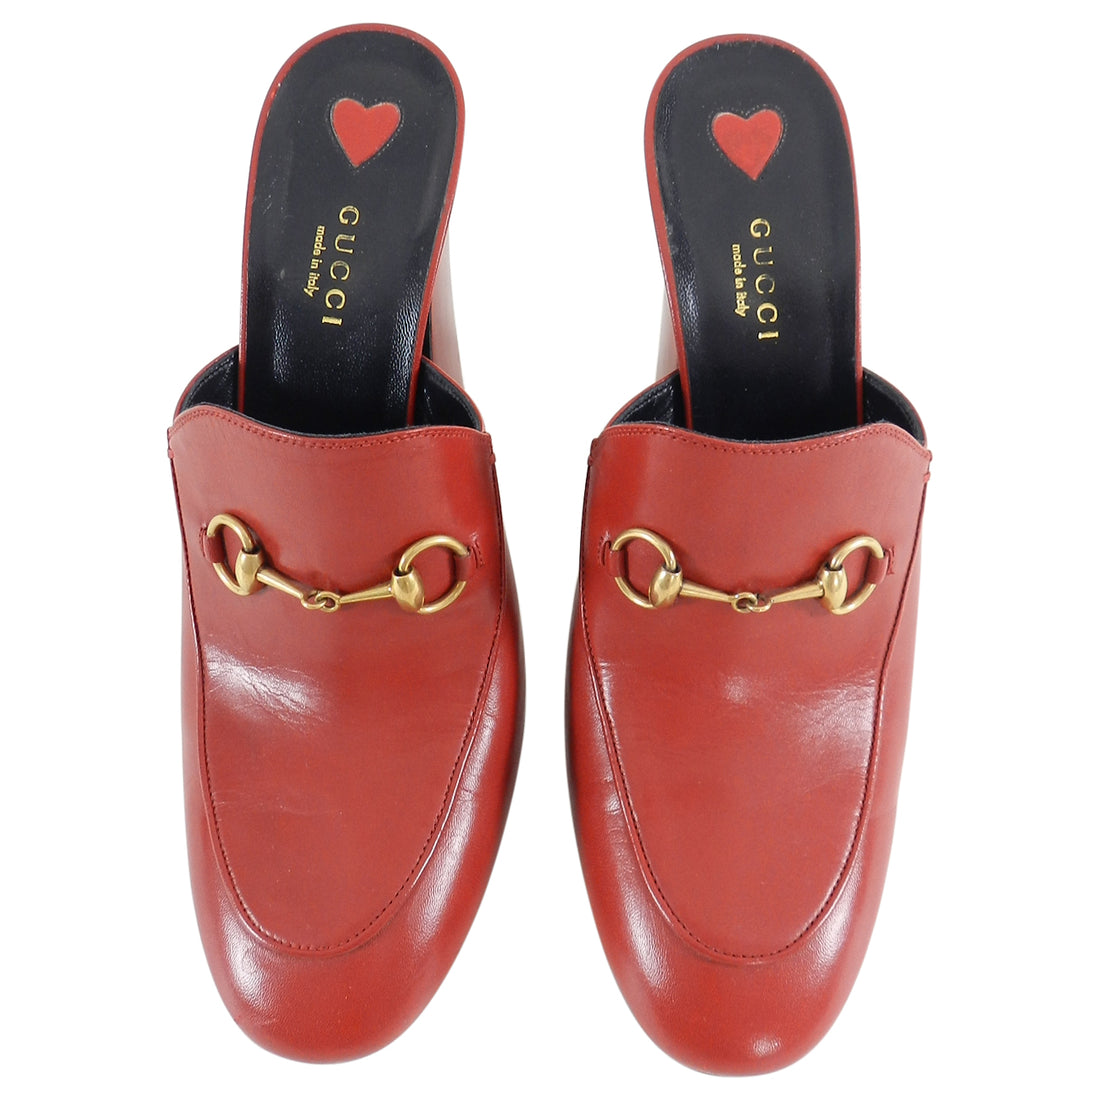 Gucci Red Leather “Julie” Princetown High Heel Mules - 40